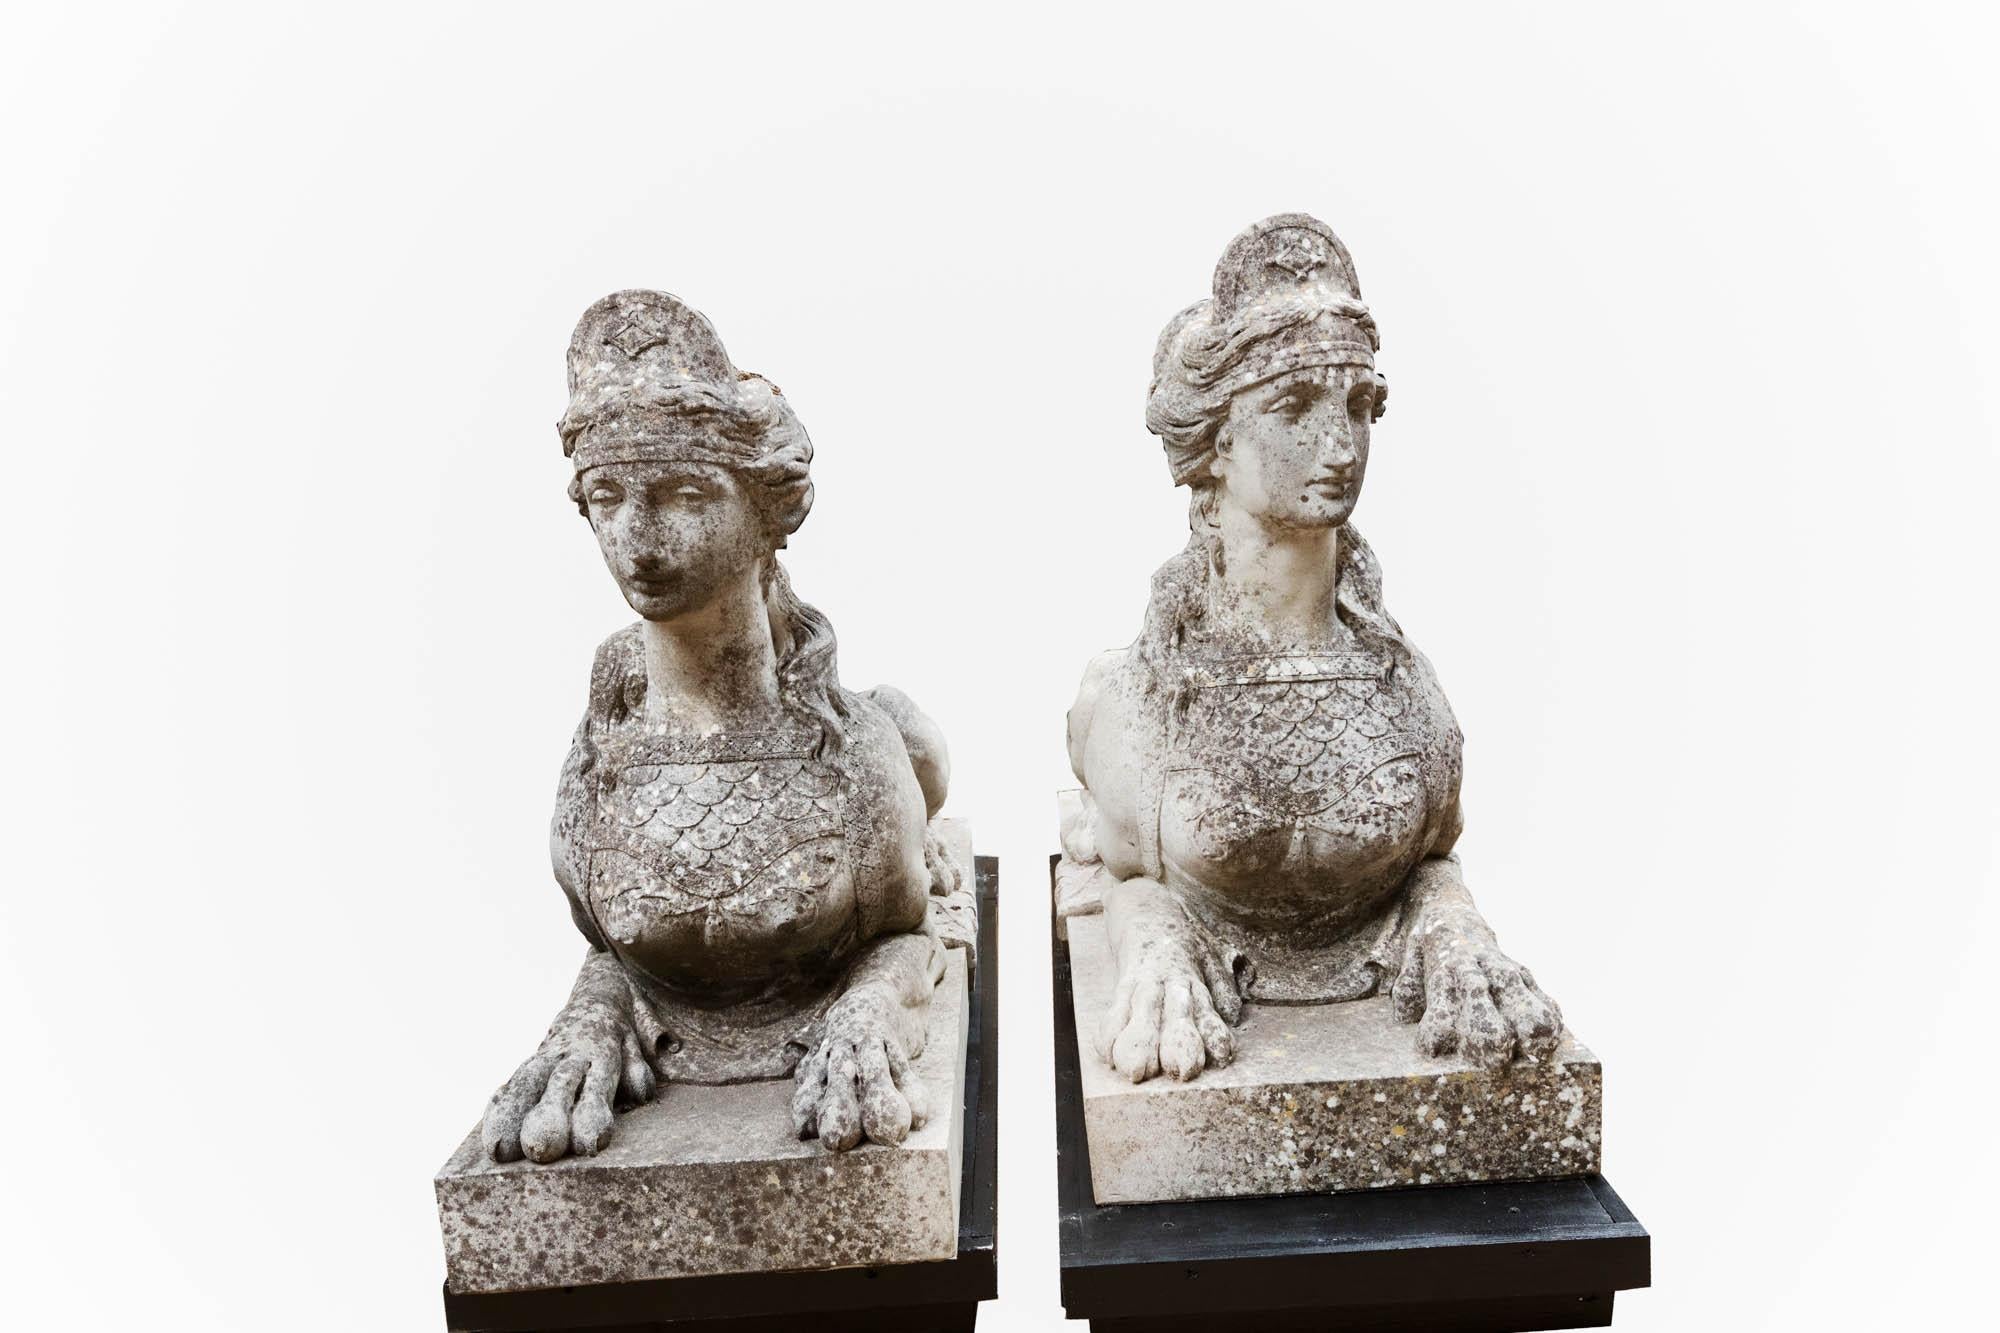 Late 18th century pair ‘Coade Stone’ sphinx figures designed by sculptor William Croggon. This fine pair are adorned with small tiaras, and are composed of female torsos with lion-like bodies covered by embroidered saddlecloths. The pair rest on